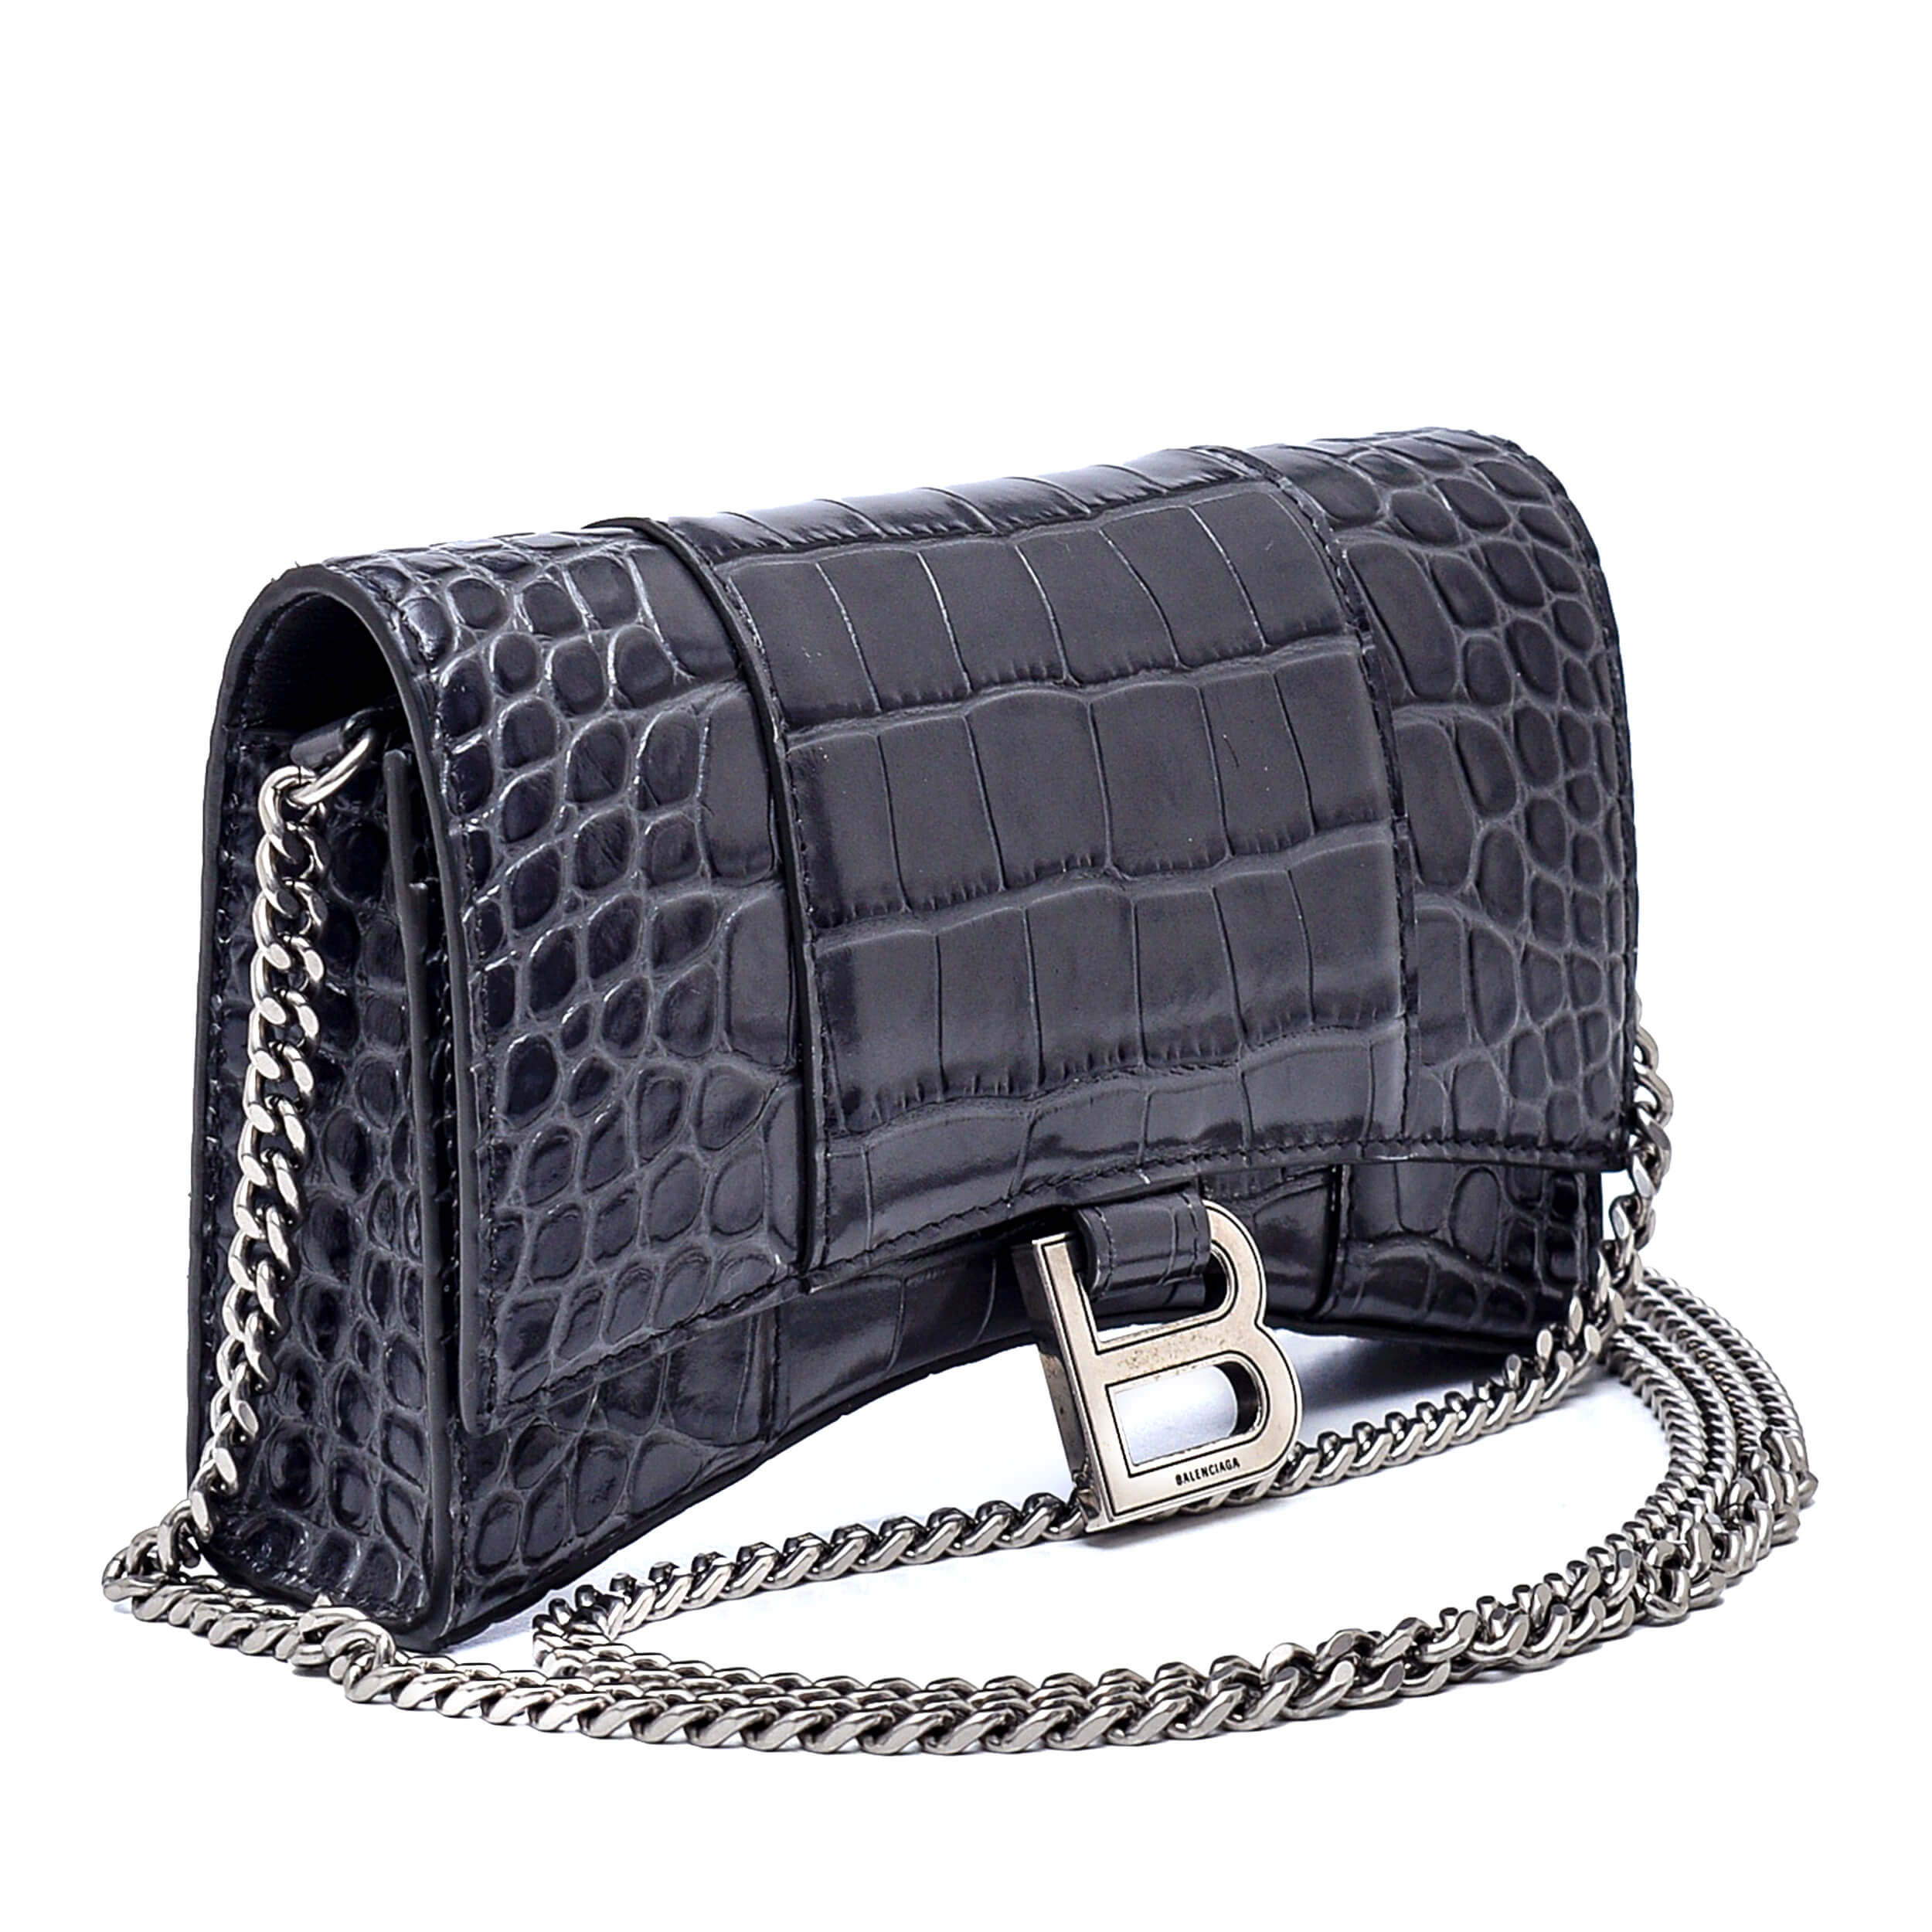 Balenciaga - Anthracite Croco Print Leather Hourglass Wallet on Chain Bag 